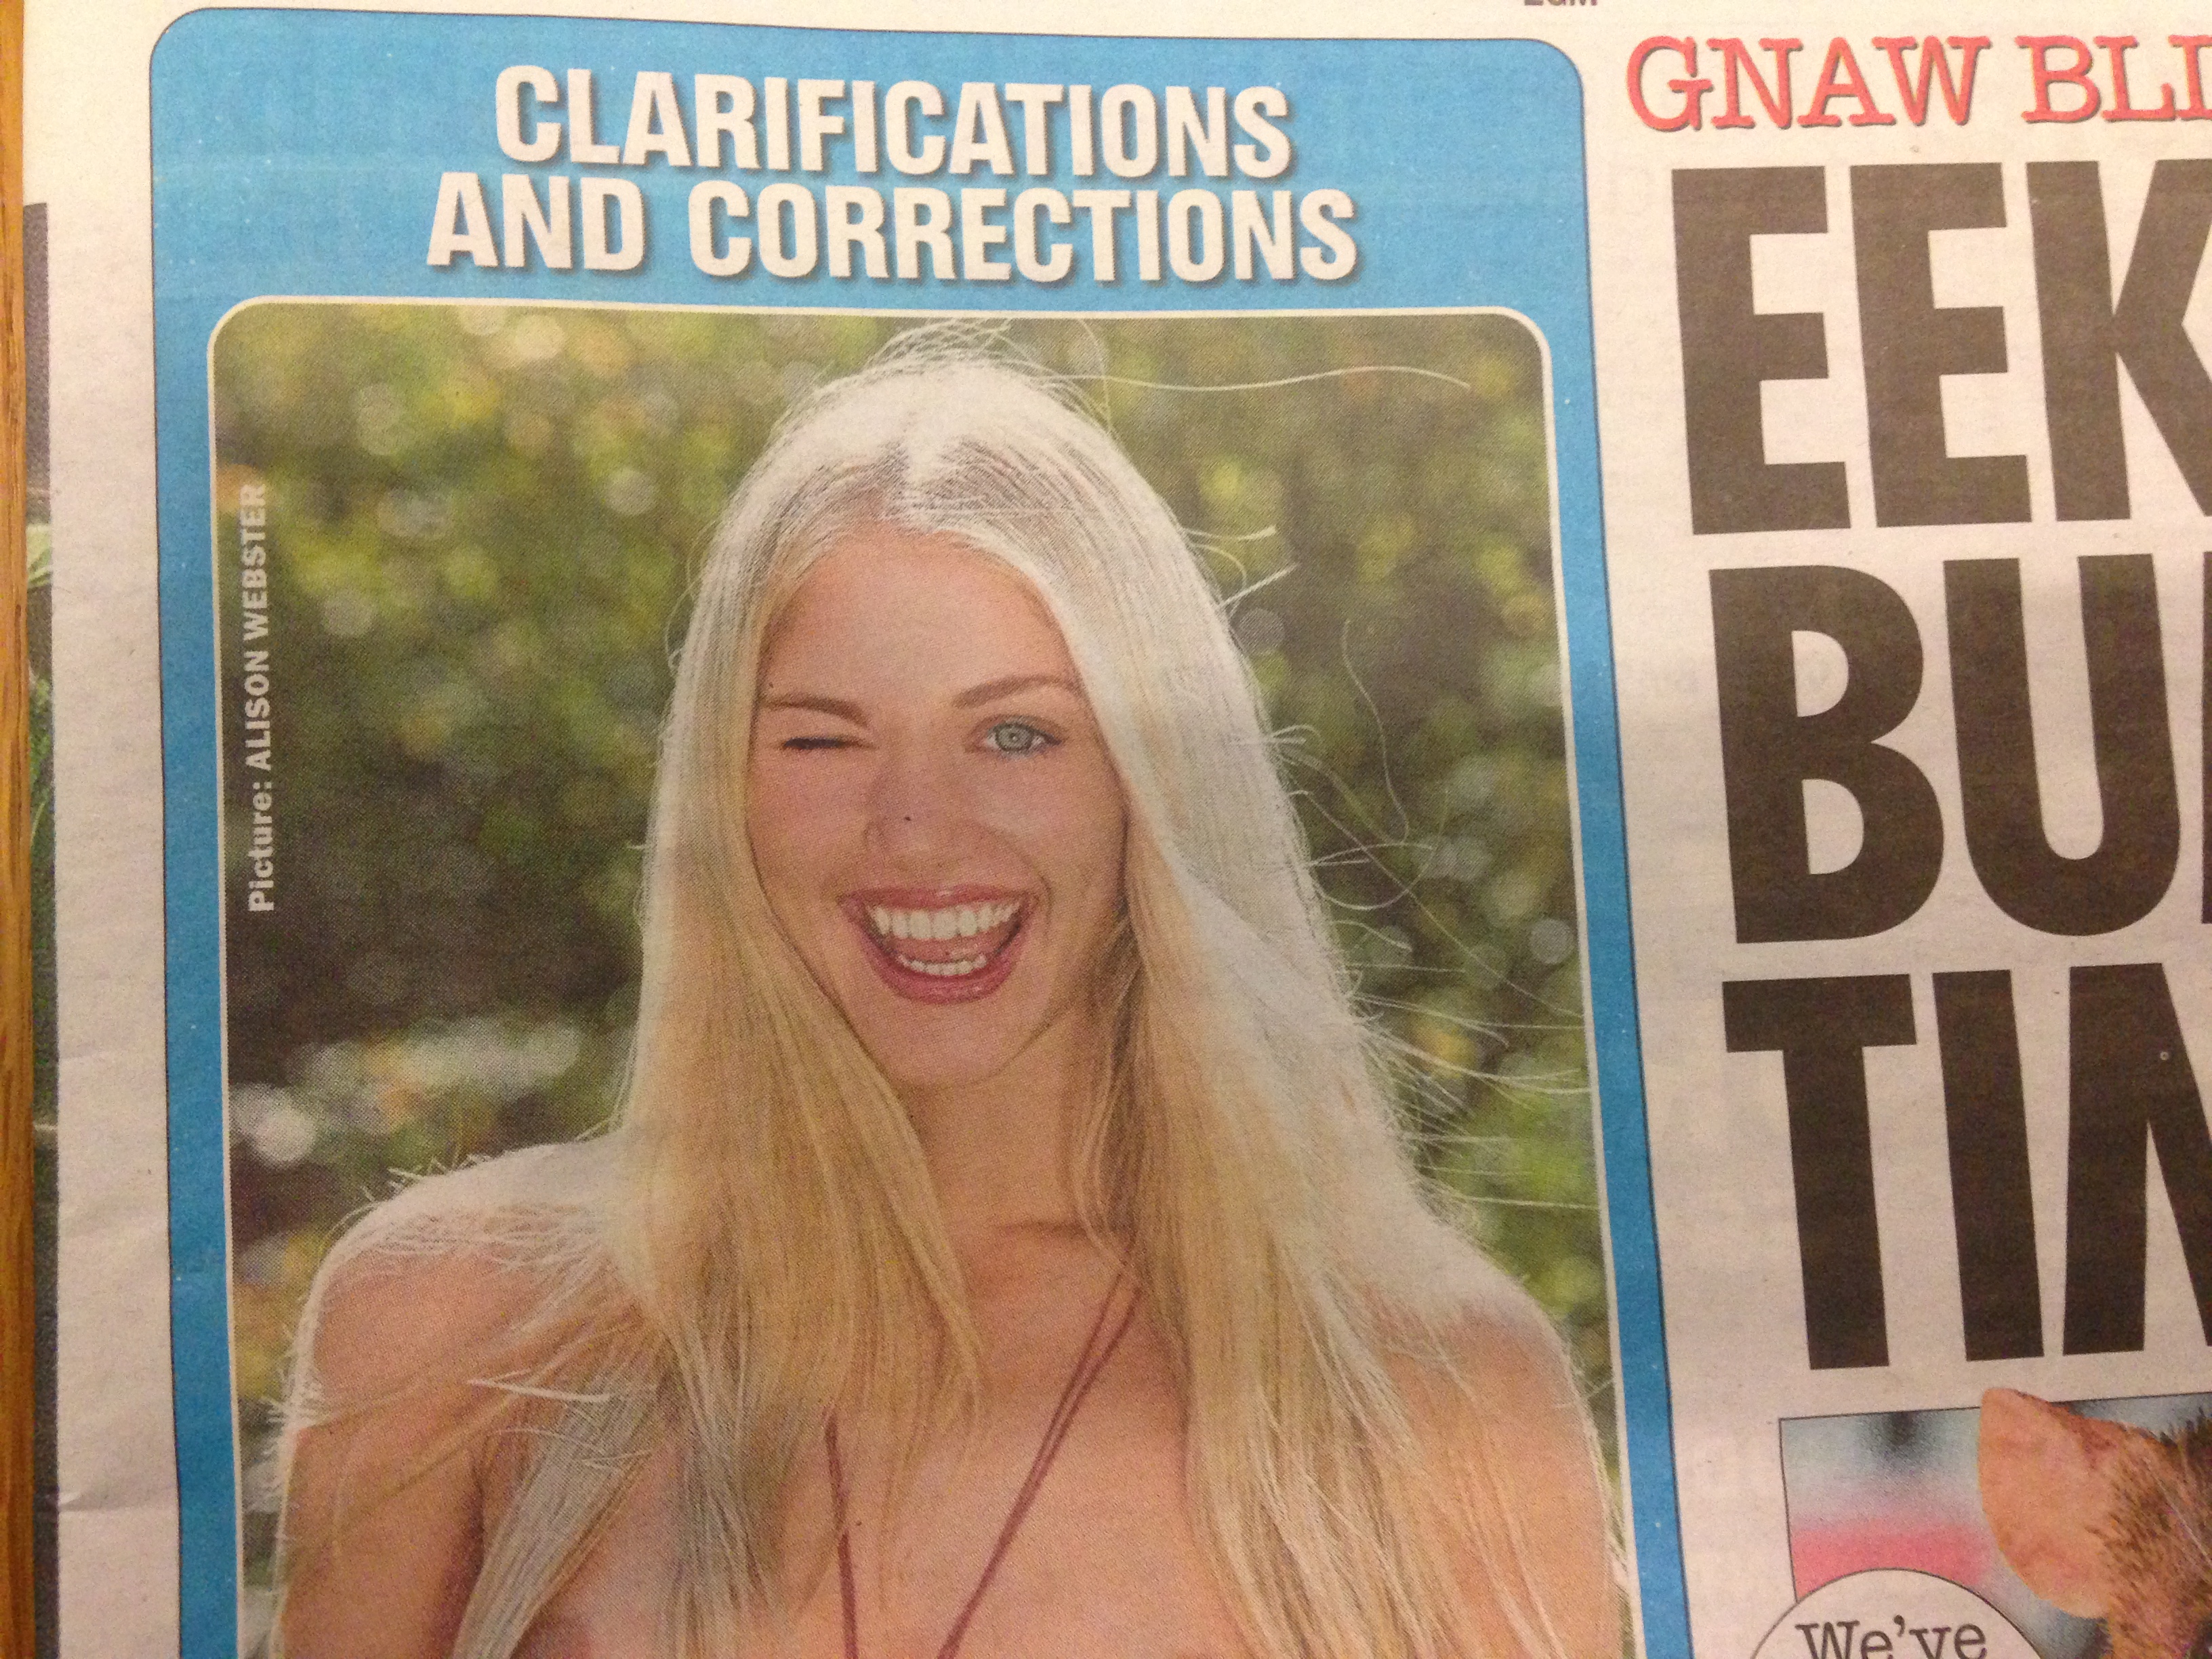 The Sun Brings Back Page 3 Girl Topless Model After Rupert Murdoch